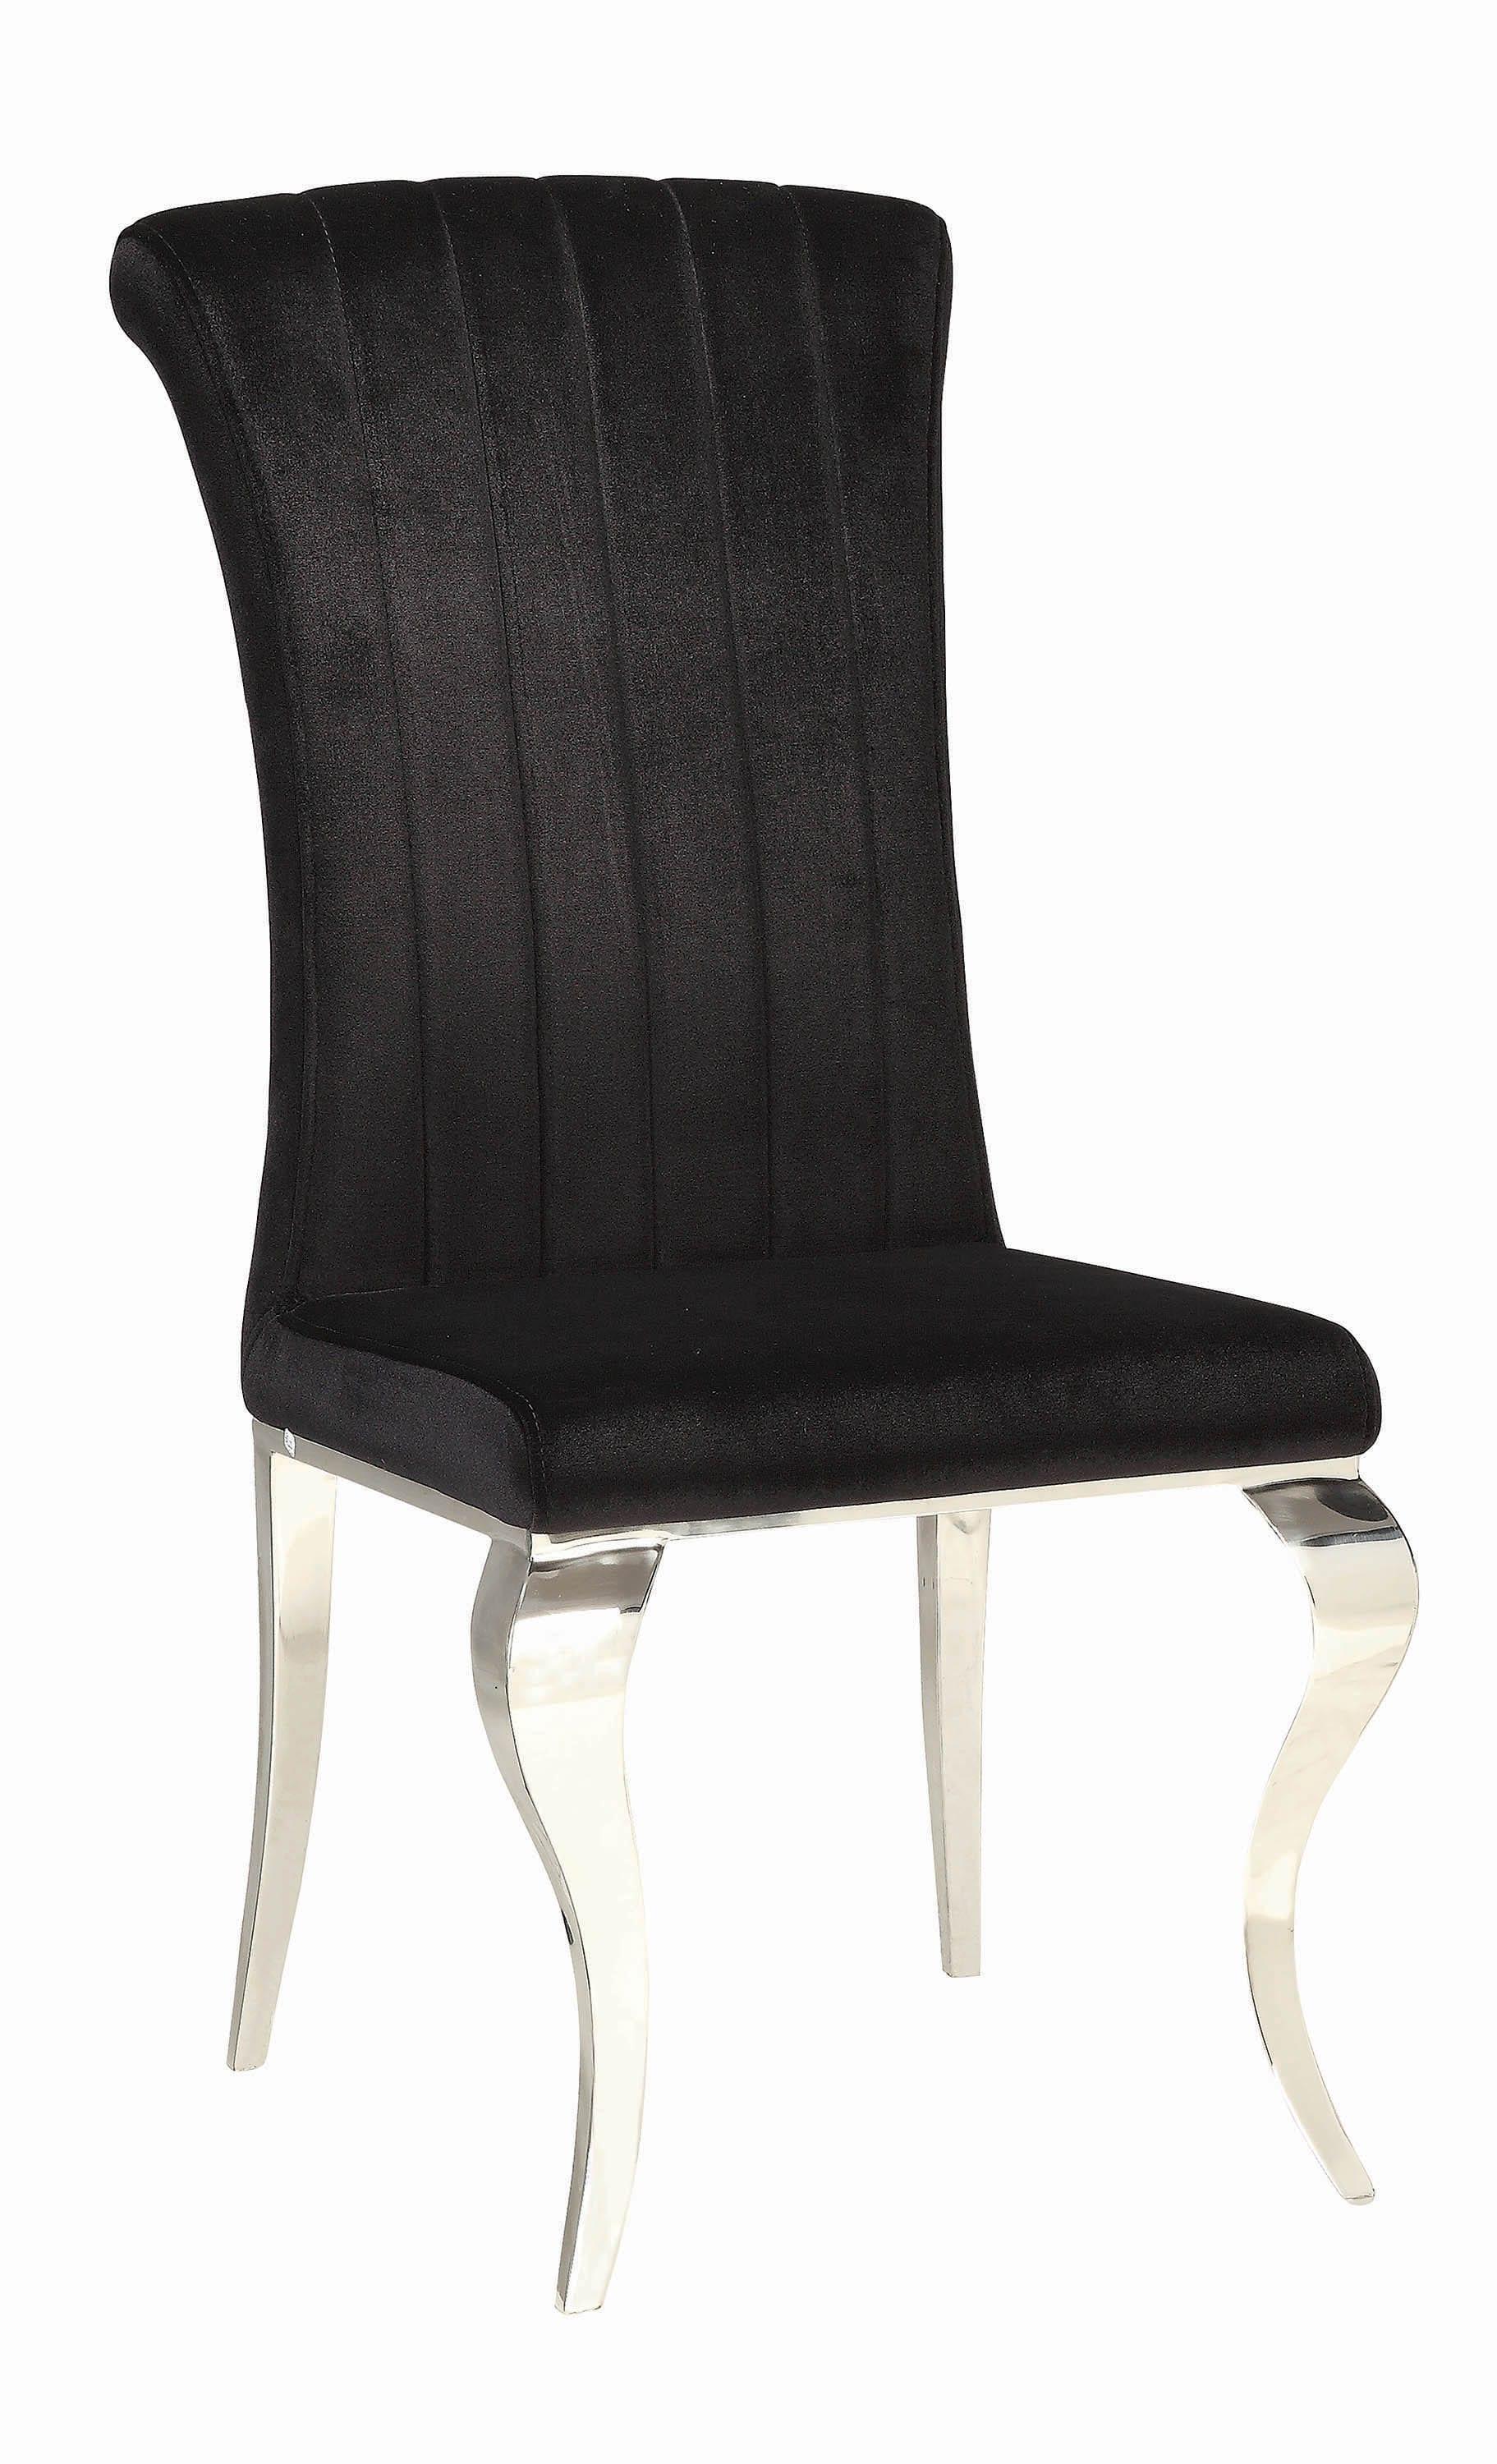 Contemporary Side Chair Barzini 105072 in Black Fabric